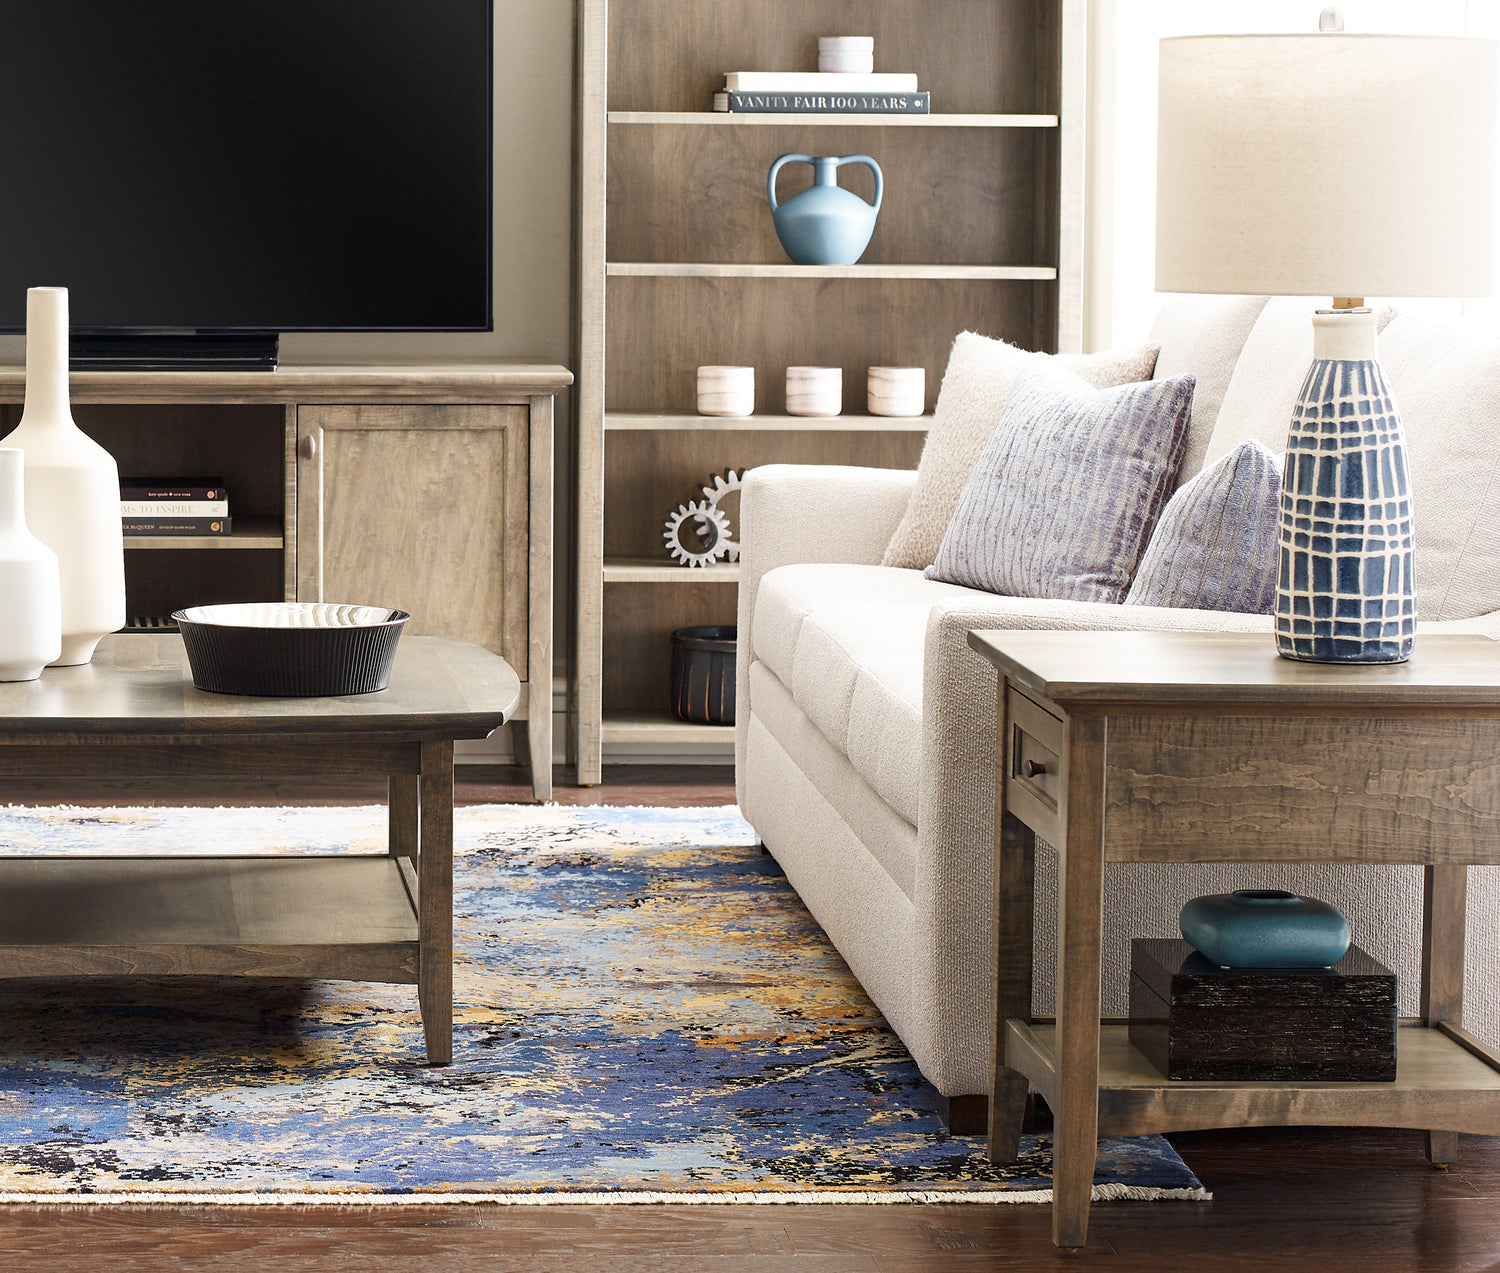 Origins by Stickley Revere living room set up with end table, coffee table, book case, and TV console table.